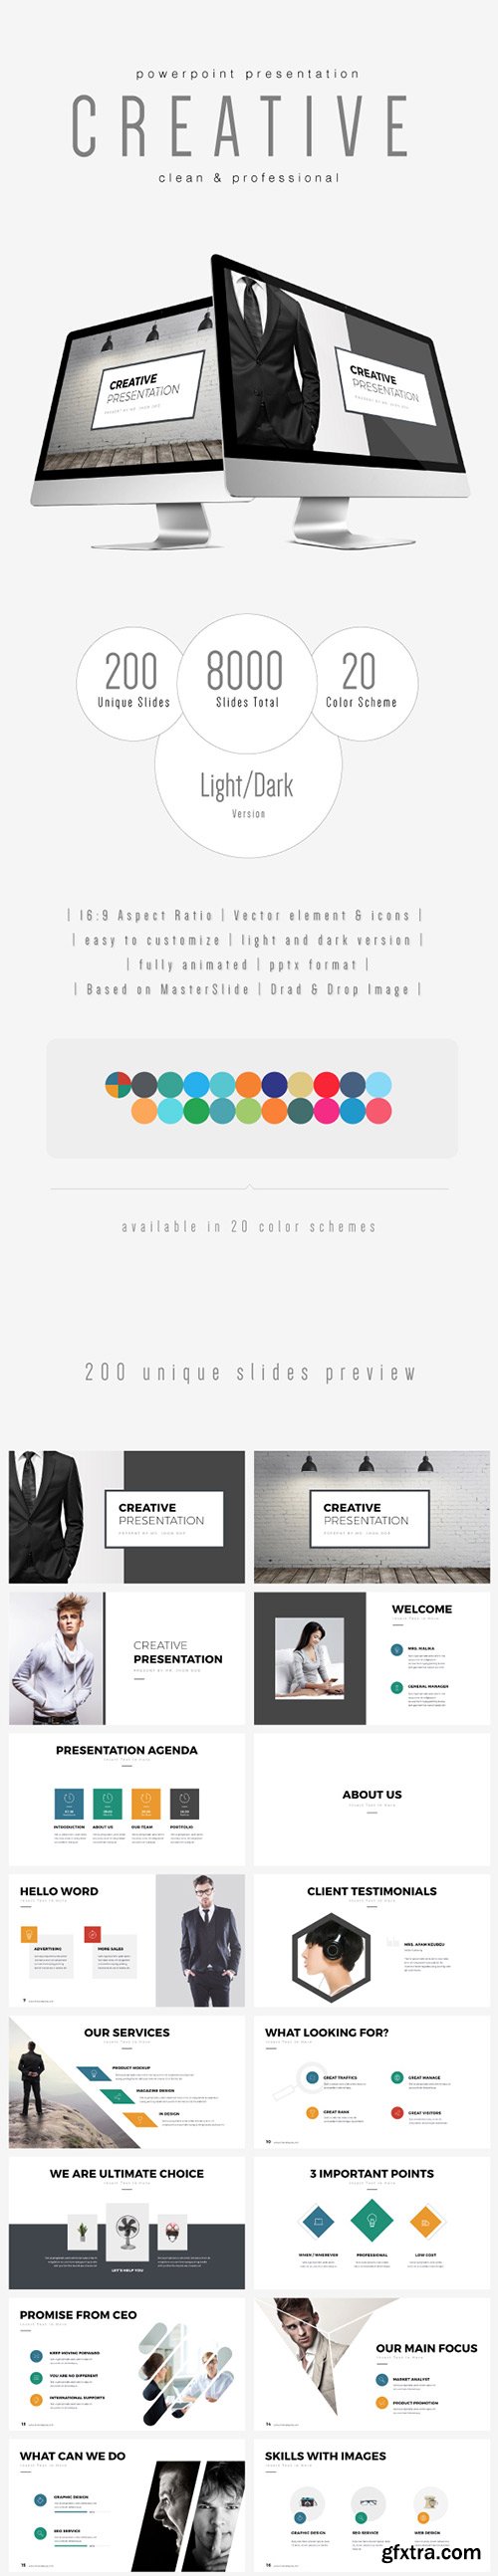 Graphicriver - CREATIVE - Multipurpose PowerPoint Template (V.32) 18049620